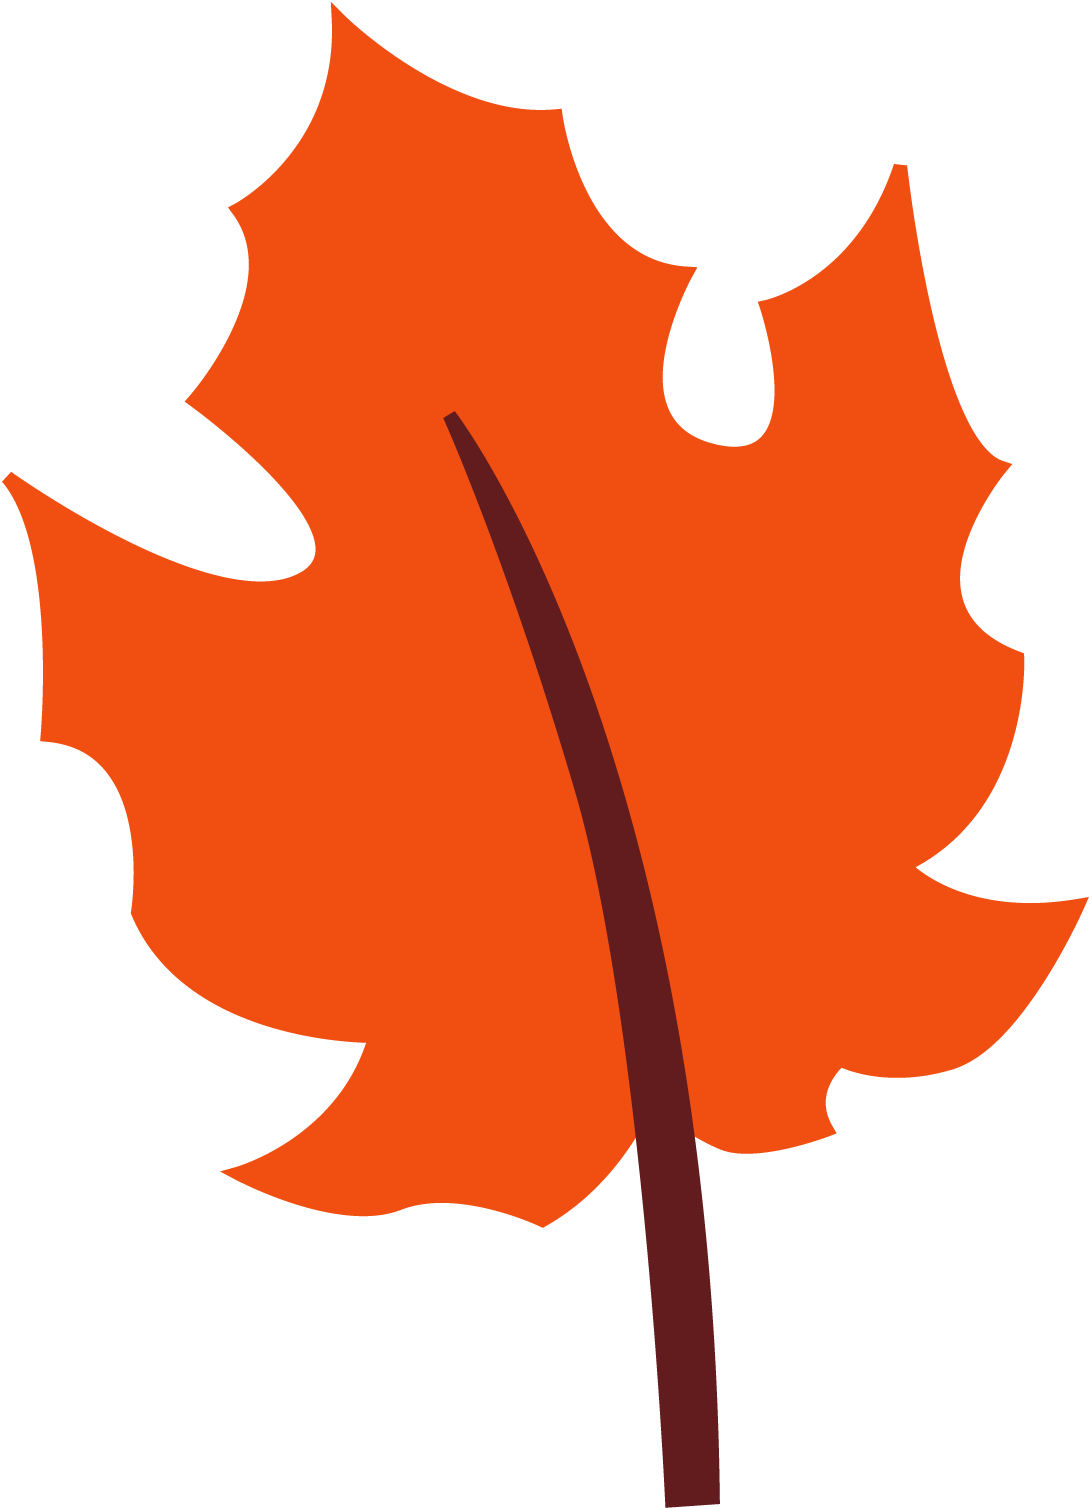 Fall leaves free clip art - Cliparting.com